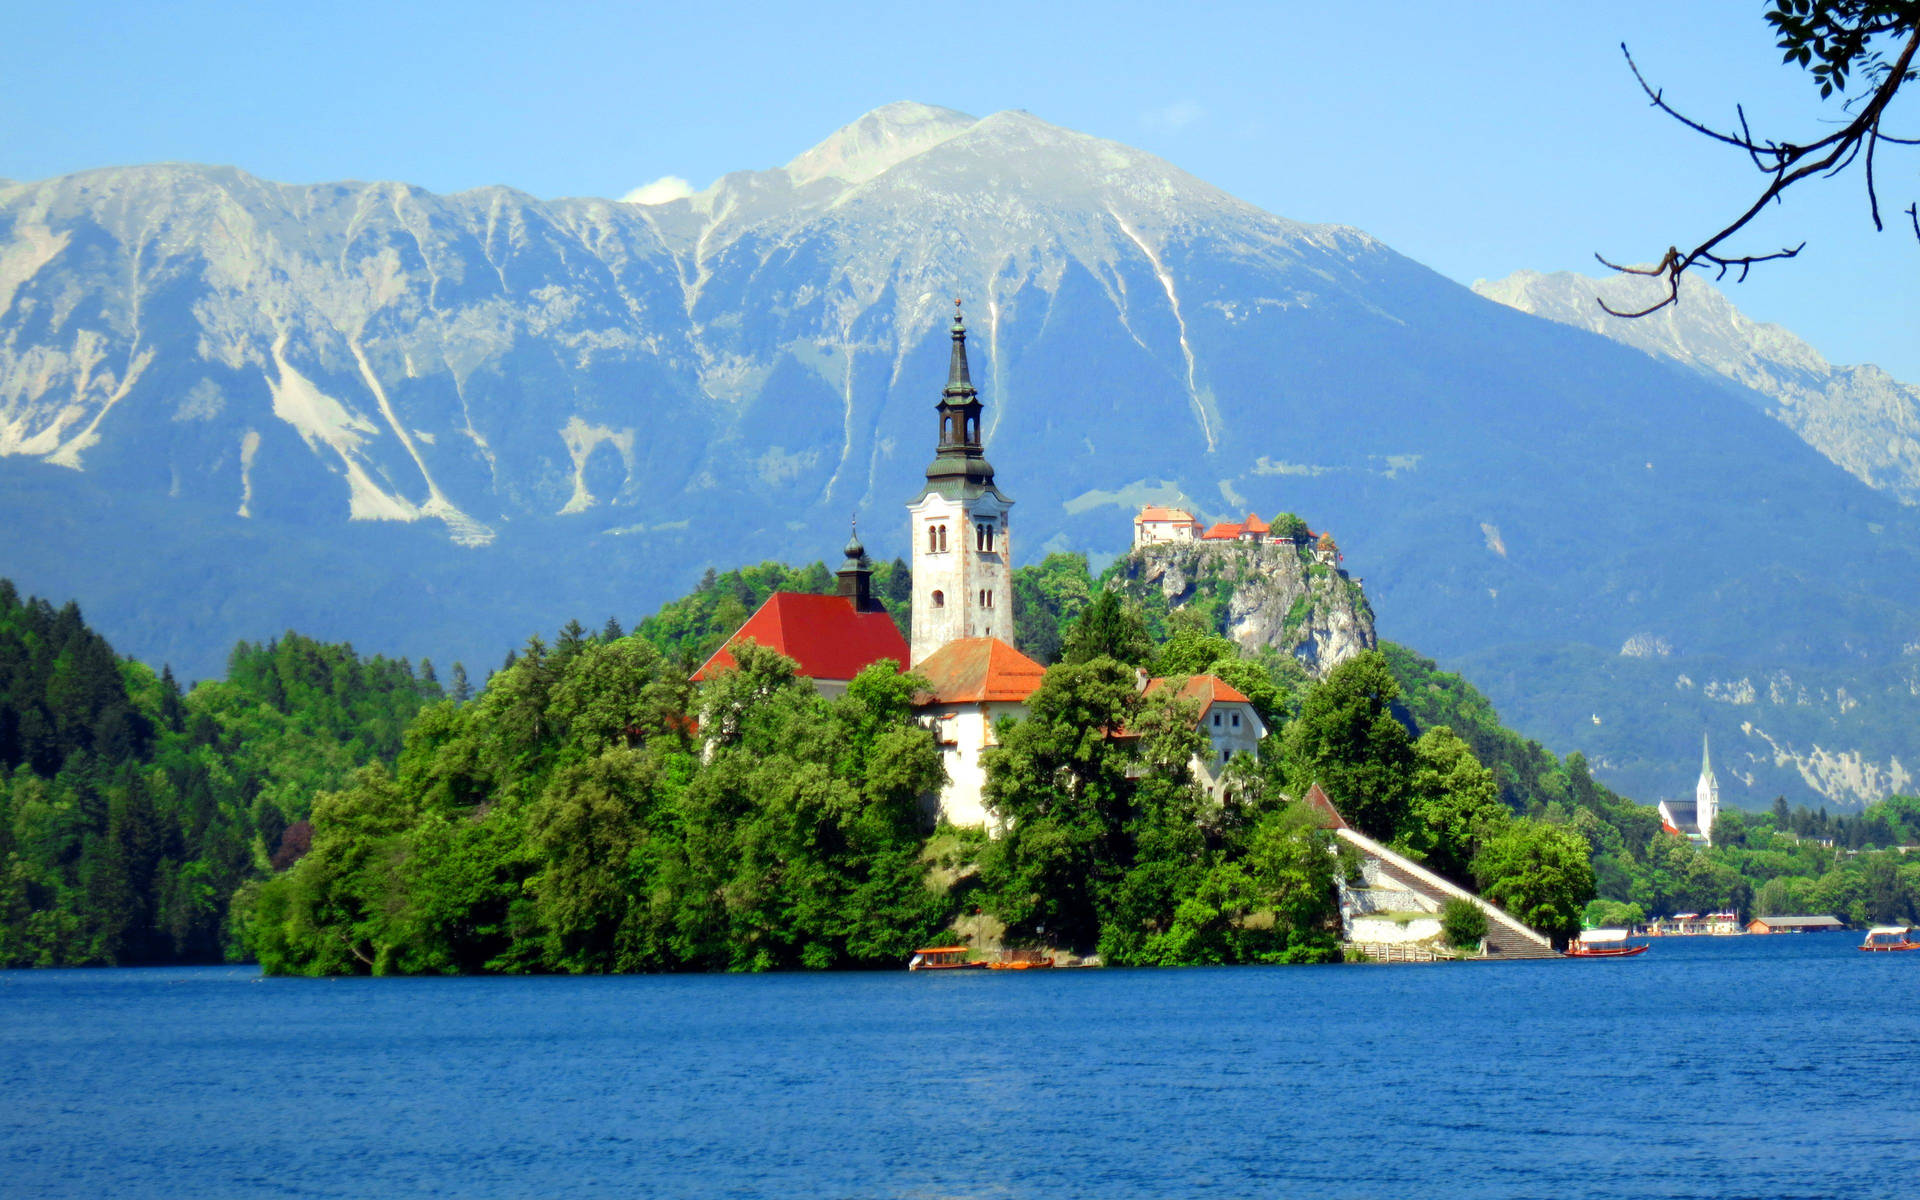 Caption: Serene View Of Lake Bled In Slovenia